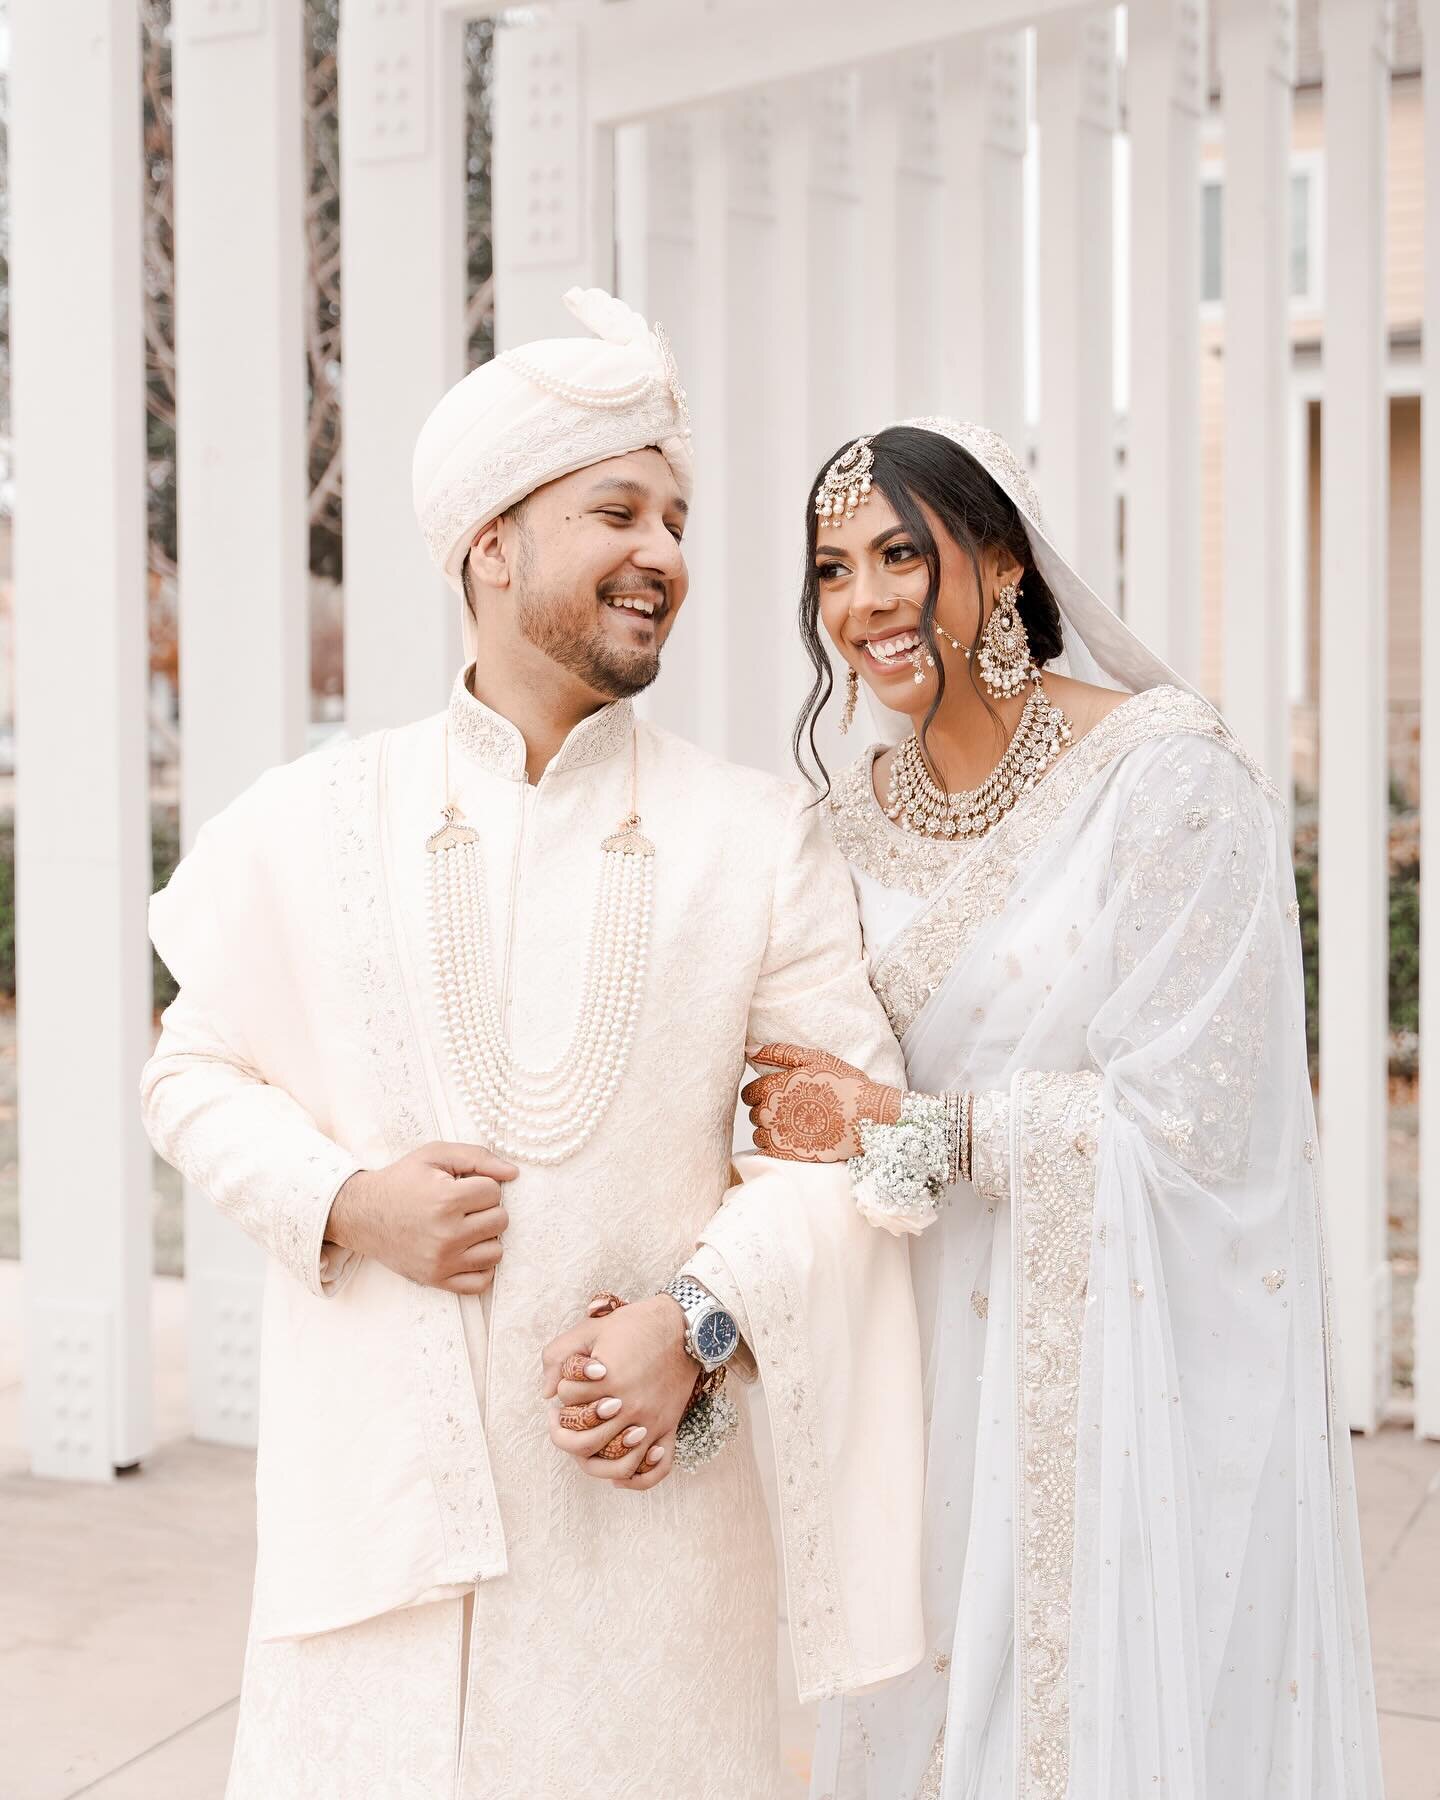 N A W S I N +  N A F I S 🤍 we&rsquo;re beyond happy for you two!

HMUA: @getthelookbyneha 
Photography: @black.iris.photos
Videography: @ramiz.prod 

.

Limited availability for 2024 &bull; Inquire today for our latest wedding guide 🖤

.
.
.

#wedd